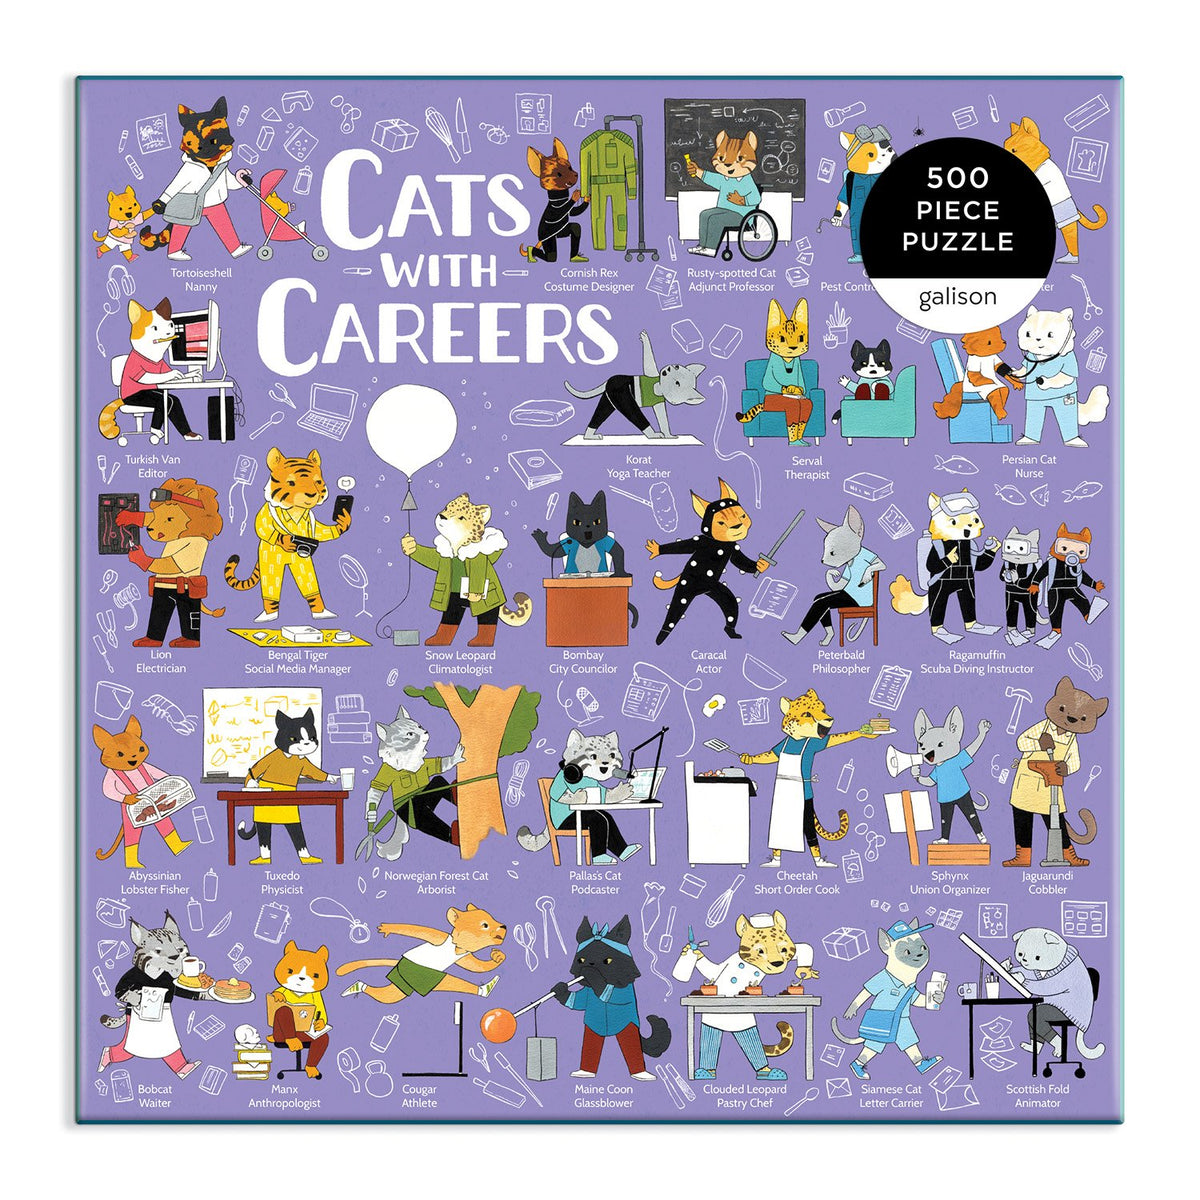 Cats with Careers 500 Piece Jigsaw Puzzle